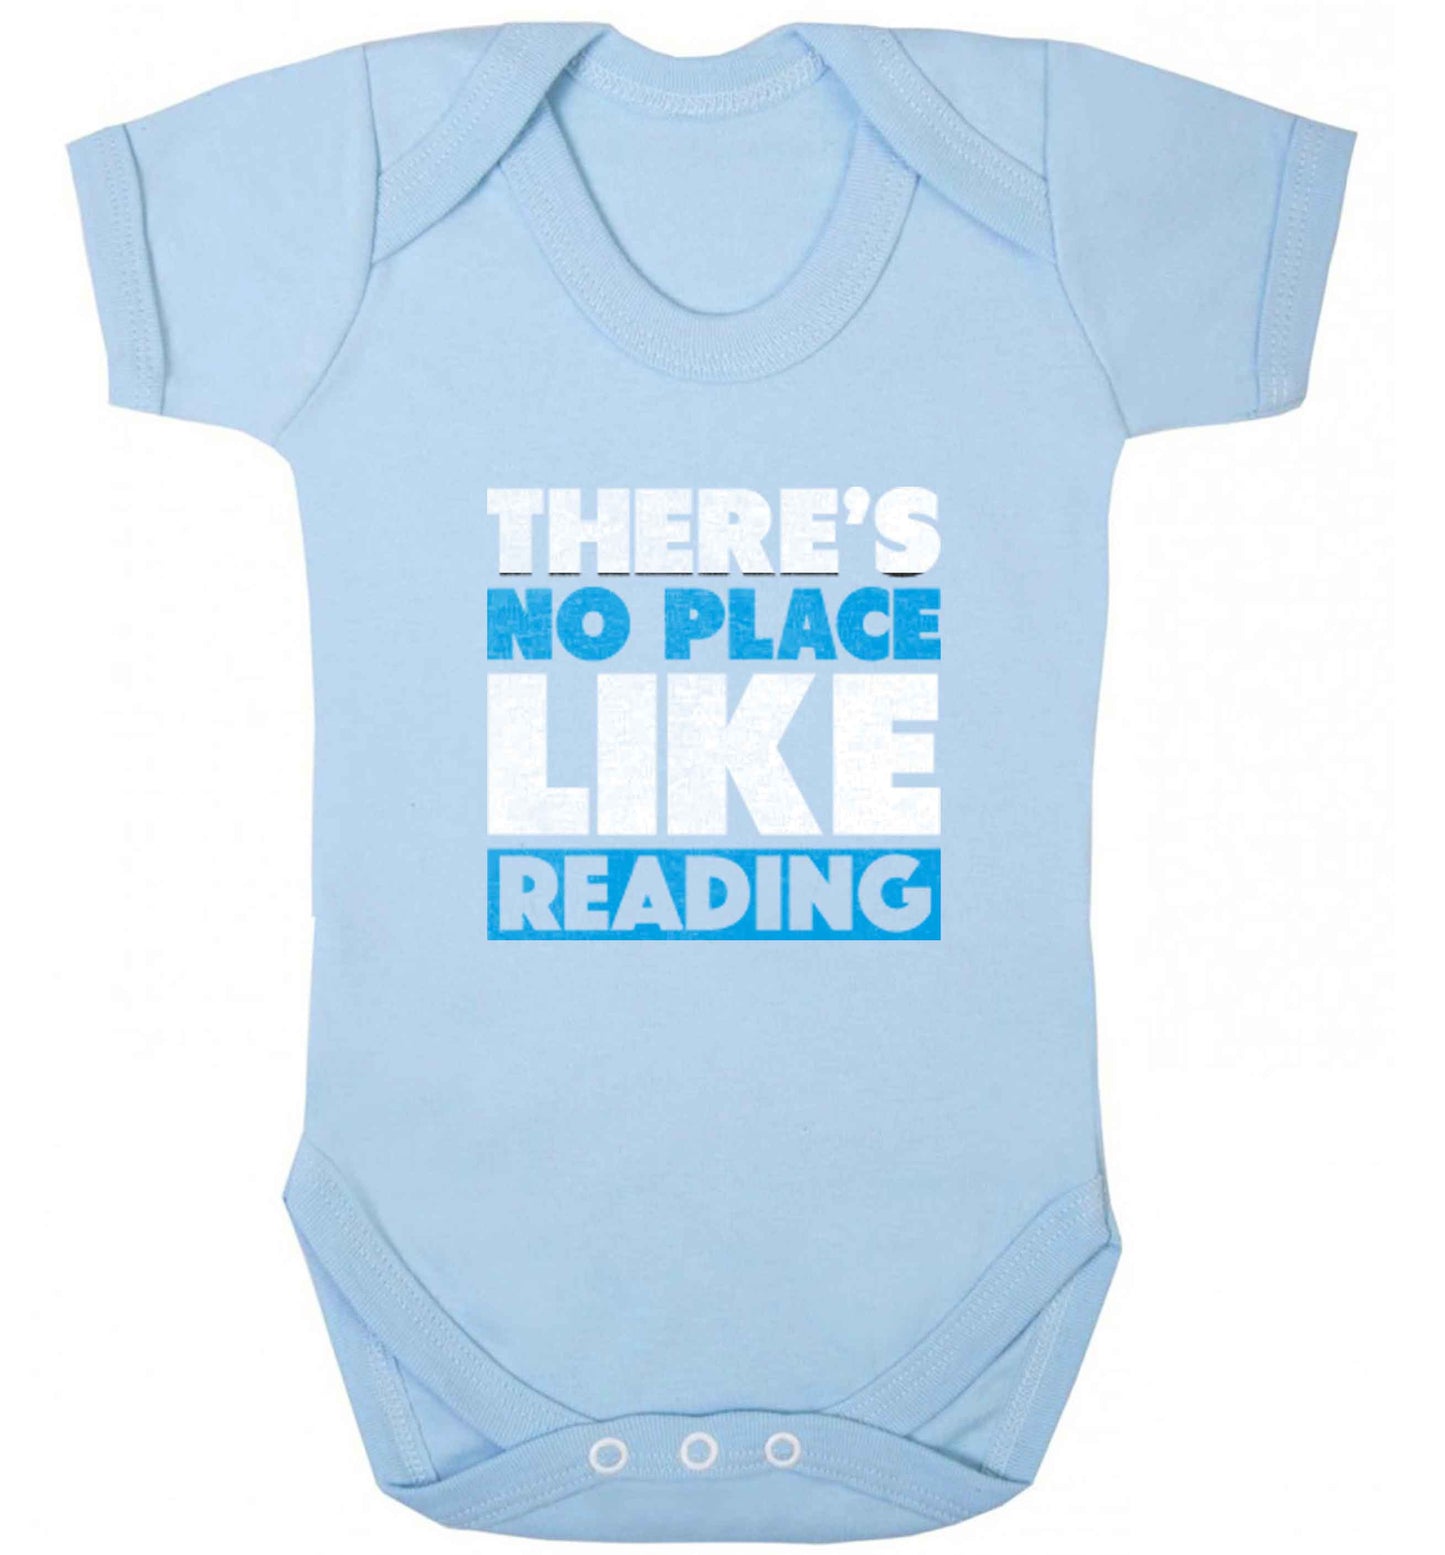 There's no place like Readingbaby vest pale blue 18-24 months